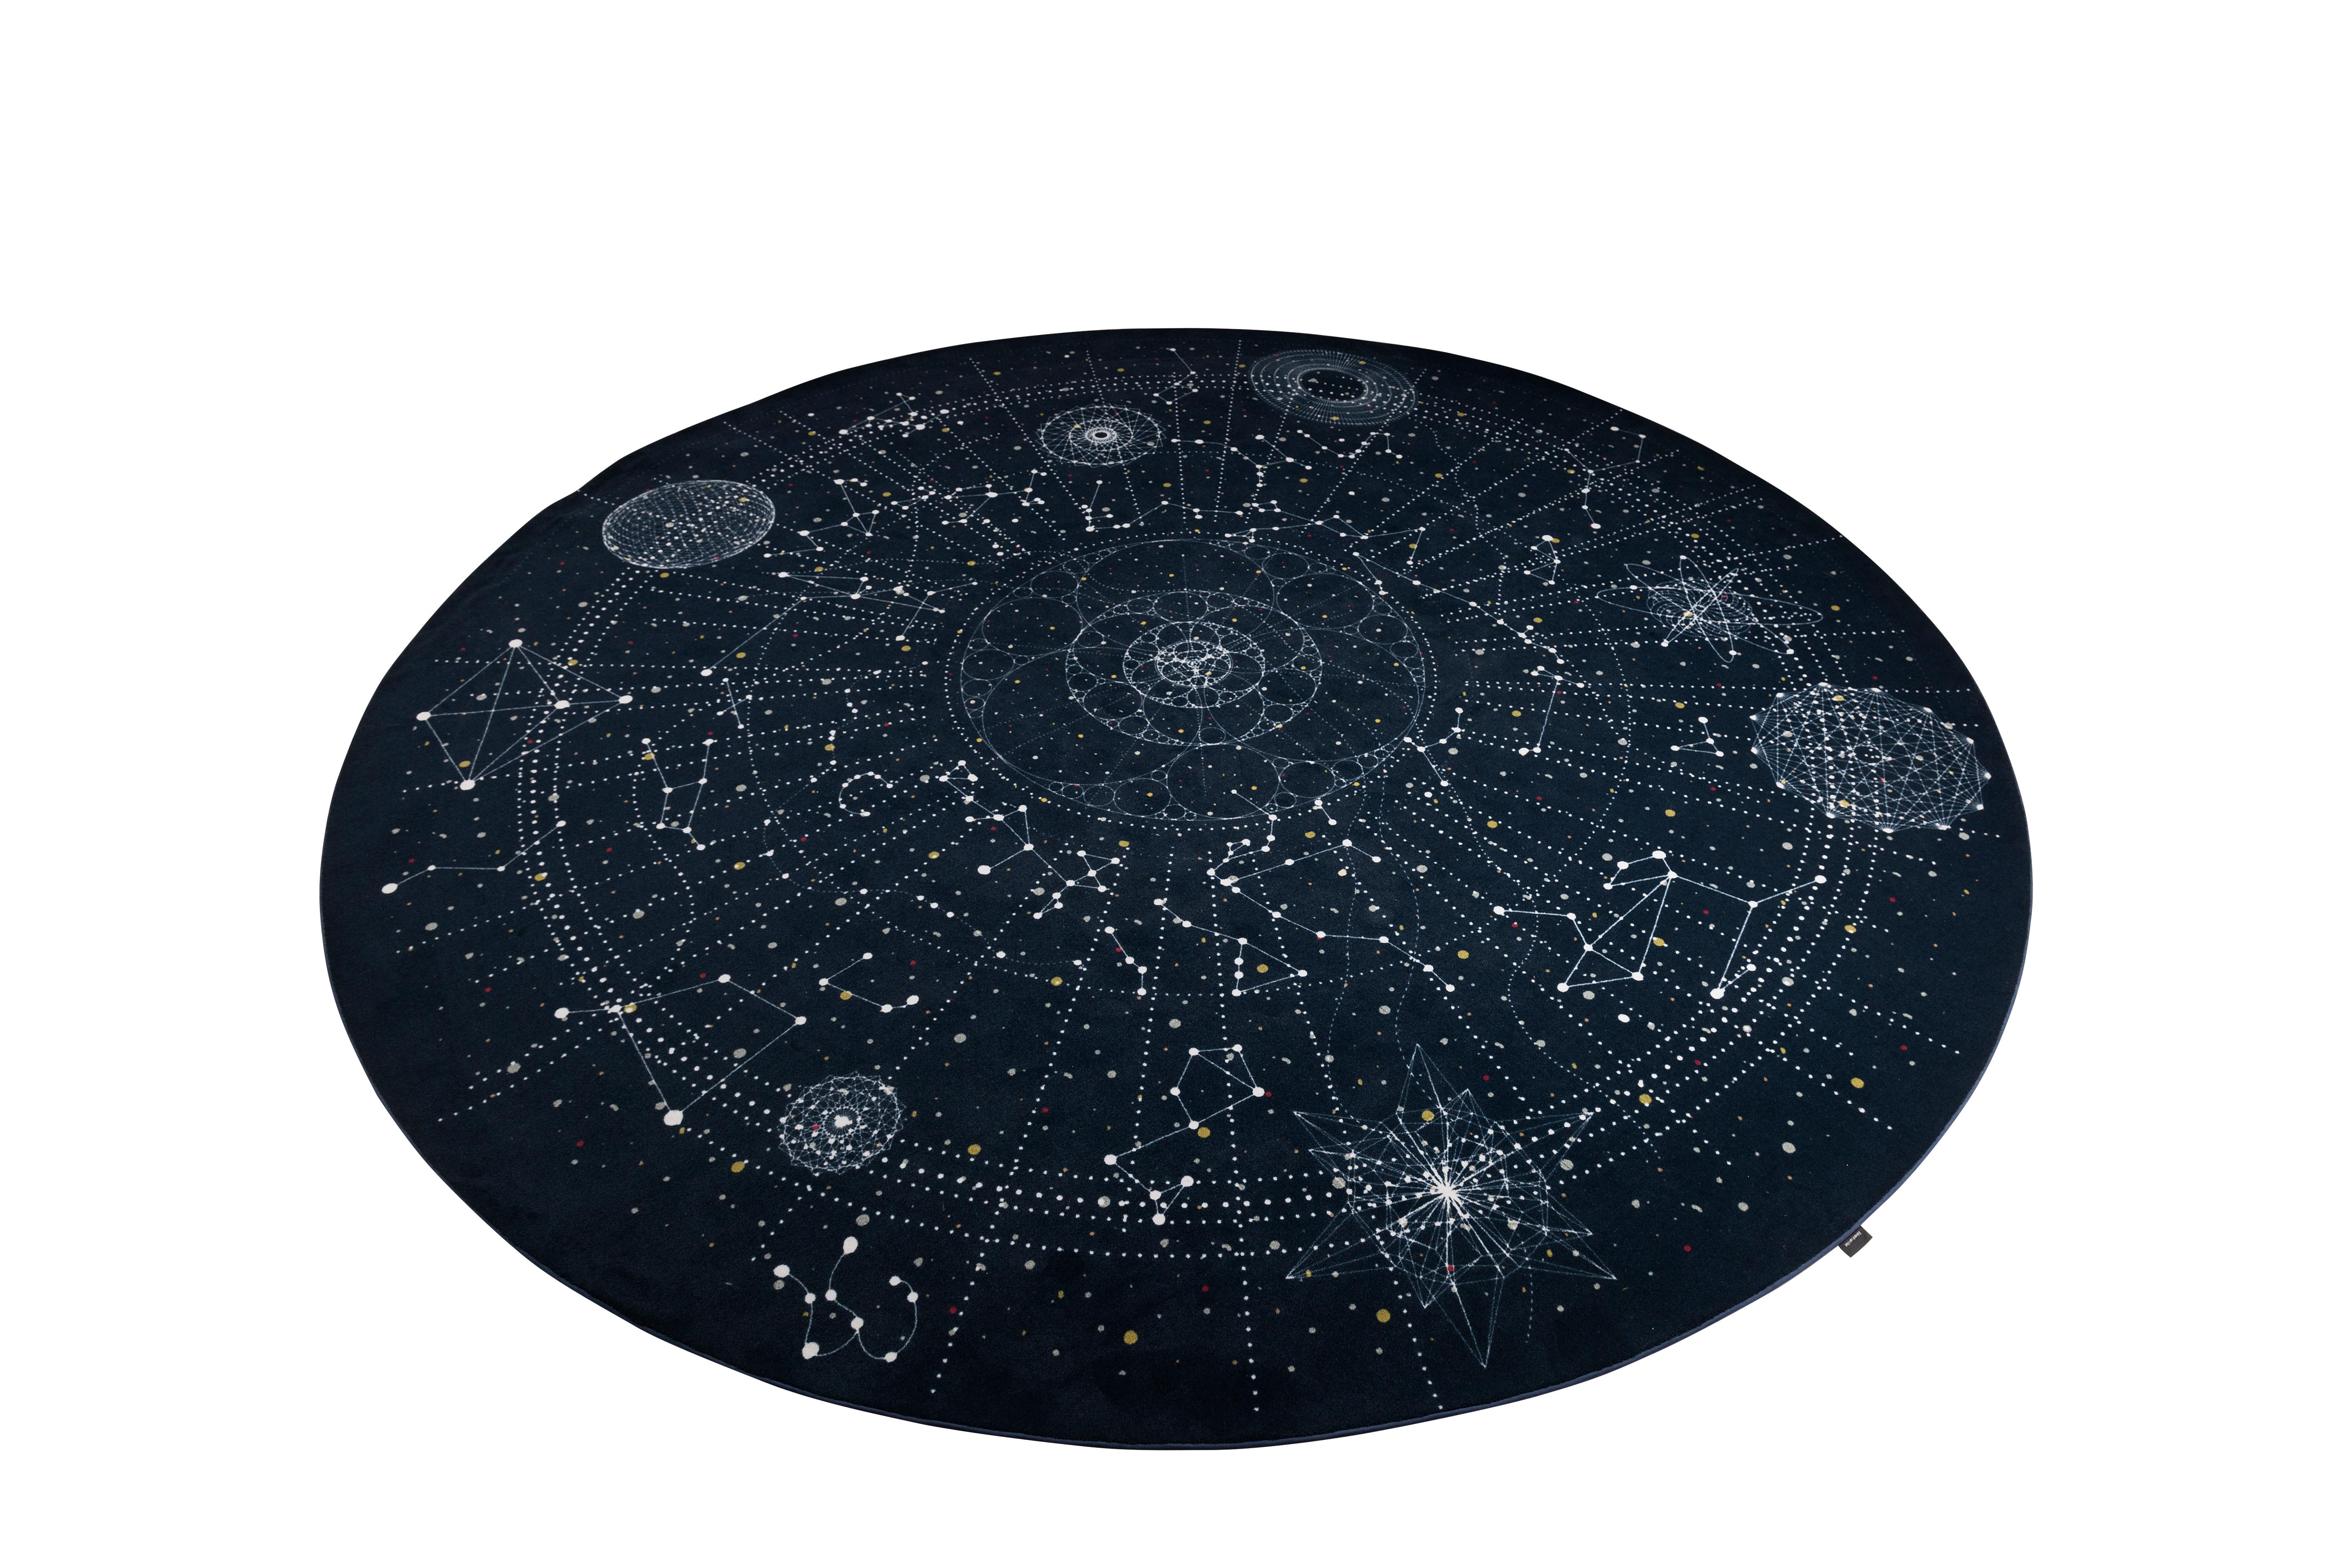 Moooi Large Celestial rug in Soft Yarn Polyamide by Edward van Vliet

After his graduation from the Design Academy Eindhoven in 1989 – Edward belongs to the famous generation of Dutch designers who have been causing international sensation for